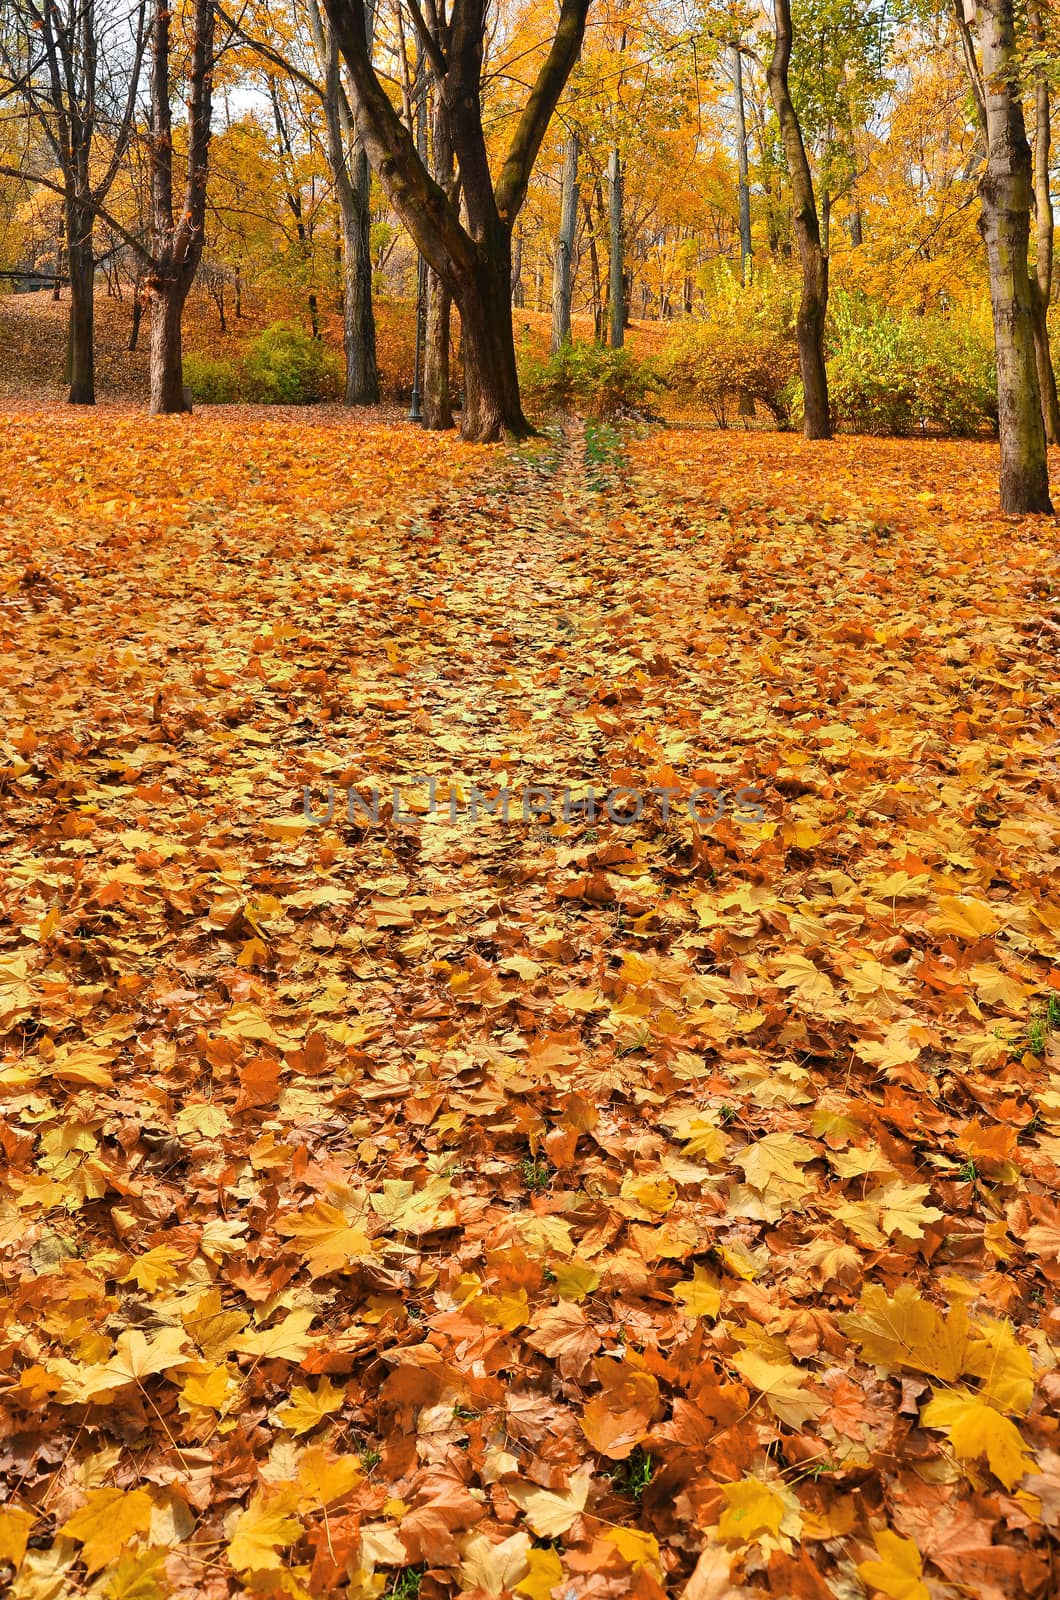 Golden autumn in the park. Falling down leafs. Central Europe. 